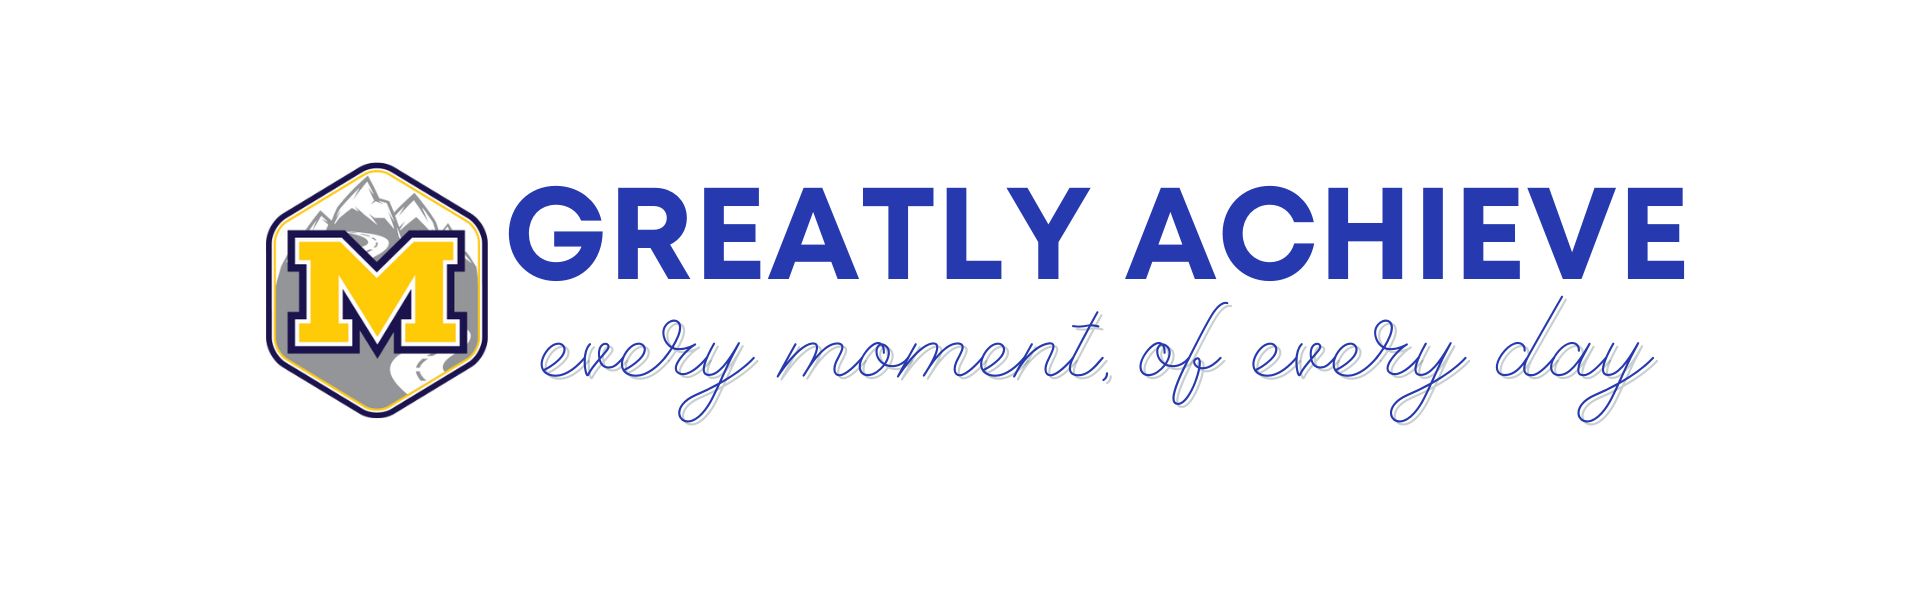 greatly achieve every moment of every day